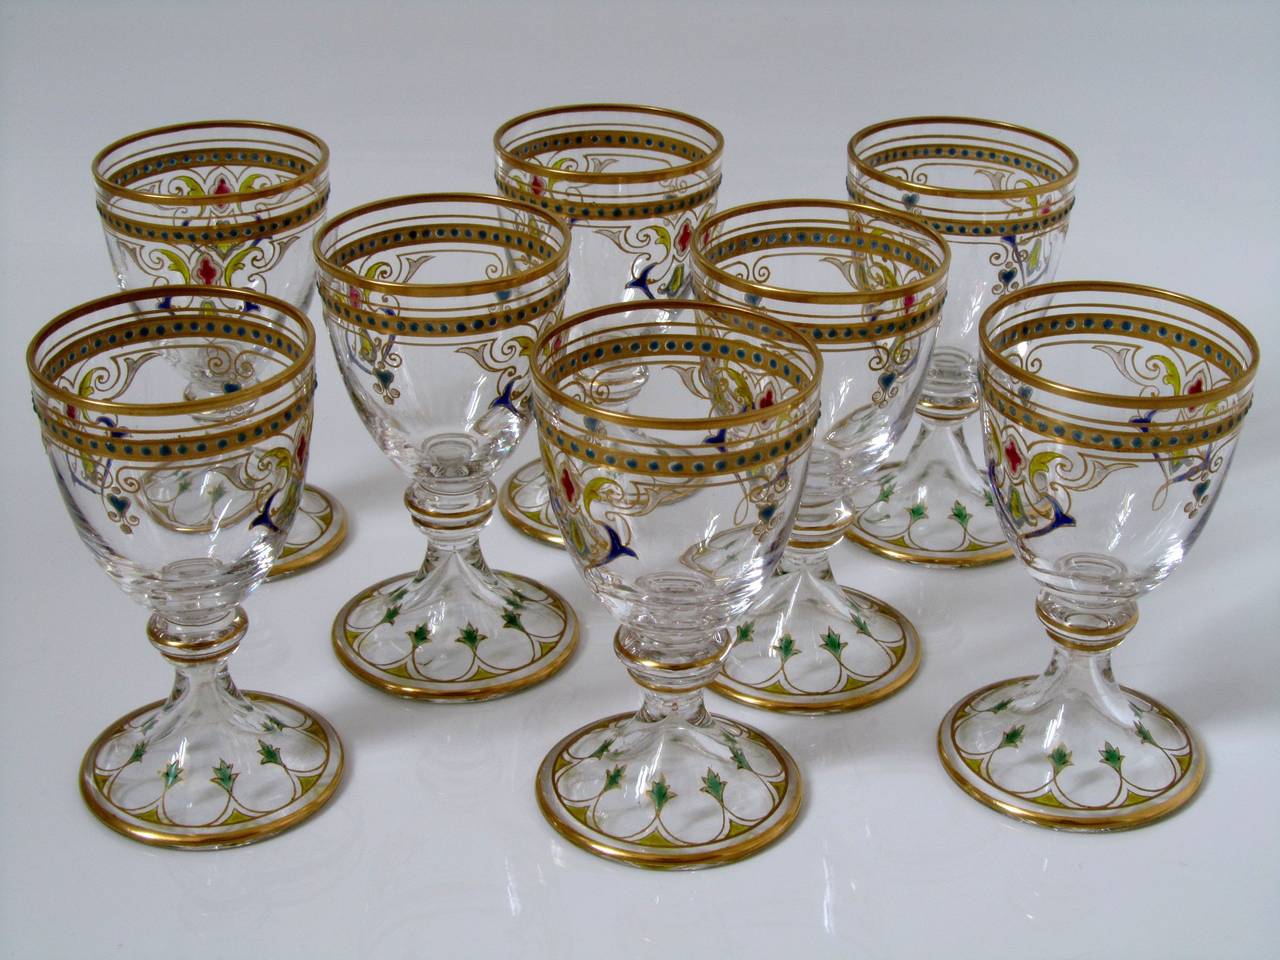 1870s Exceptional French Baccarat Enameled Crystal Liquor Service 3